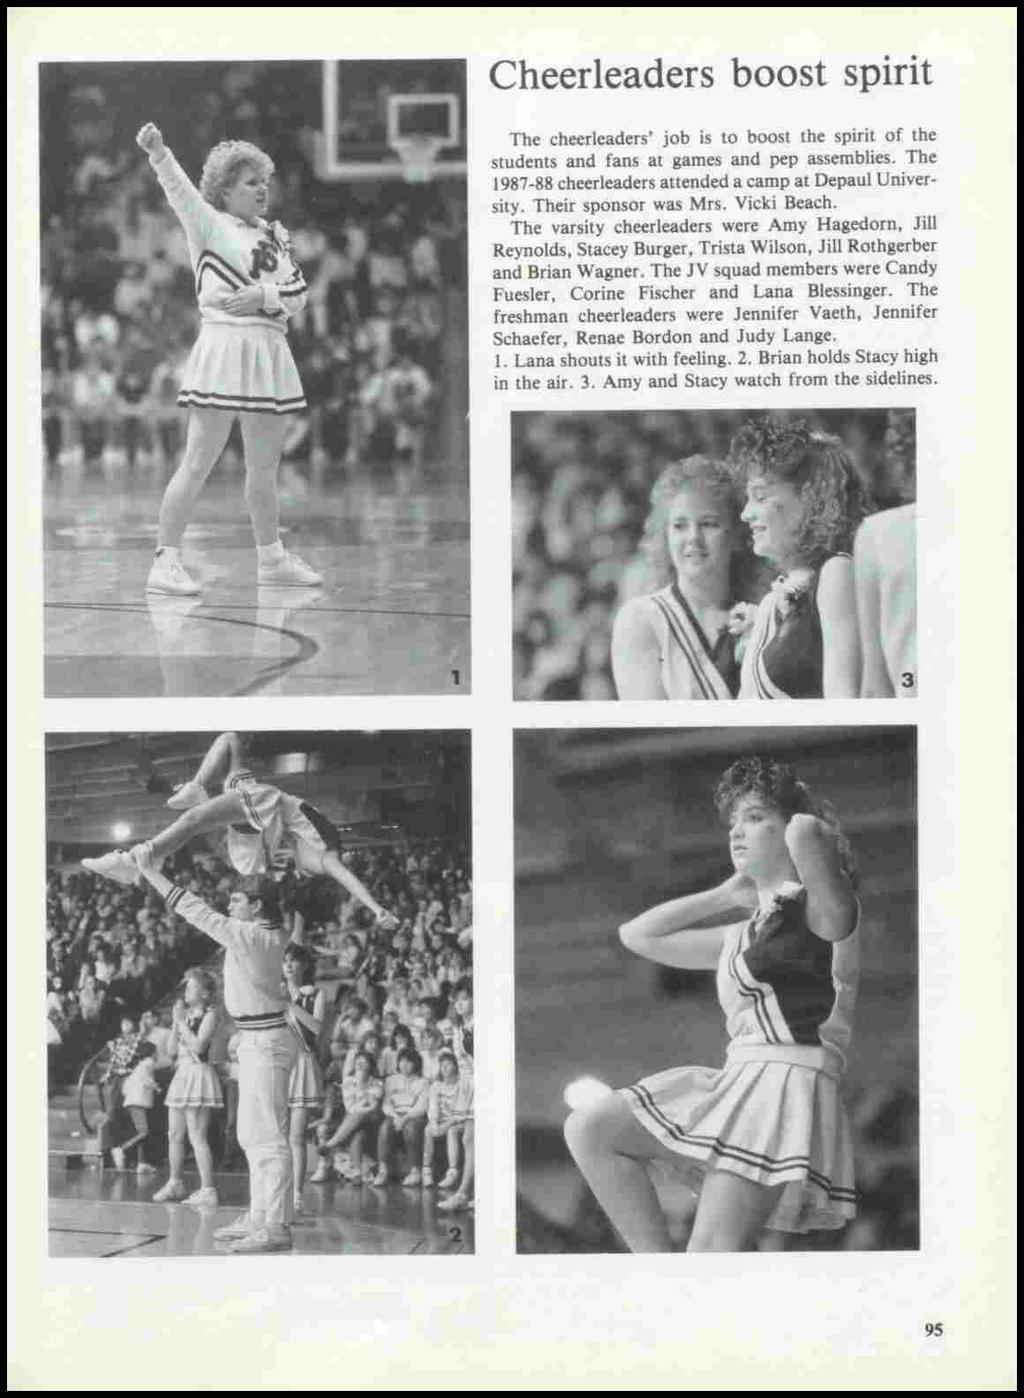 Cheerleaders boost spirit The cheerleaders' job is to boost the spirit of the students and fans at games and pep assemblies. The 1987-88 cheerleaders attended a camp at Depaul University.